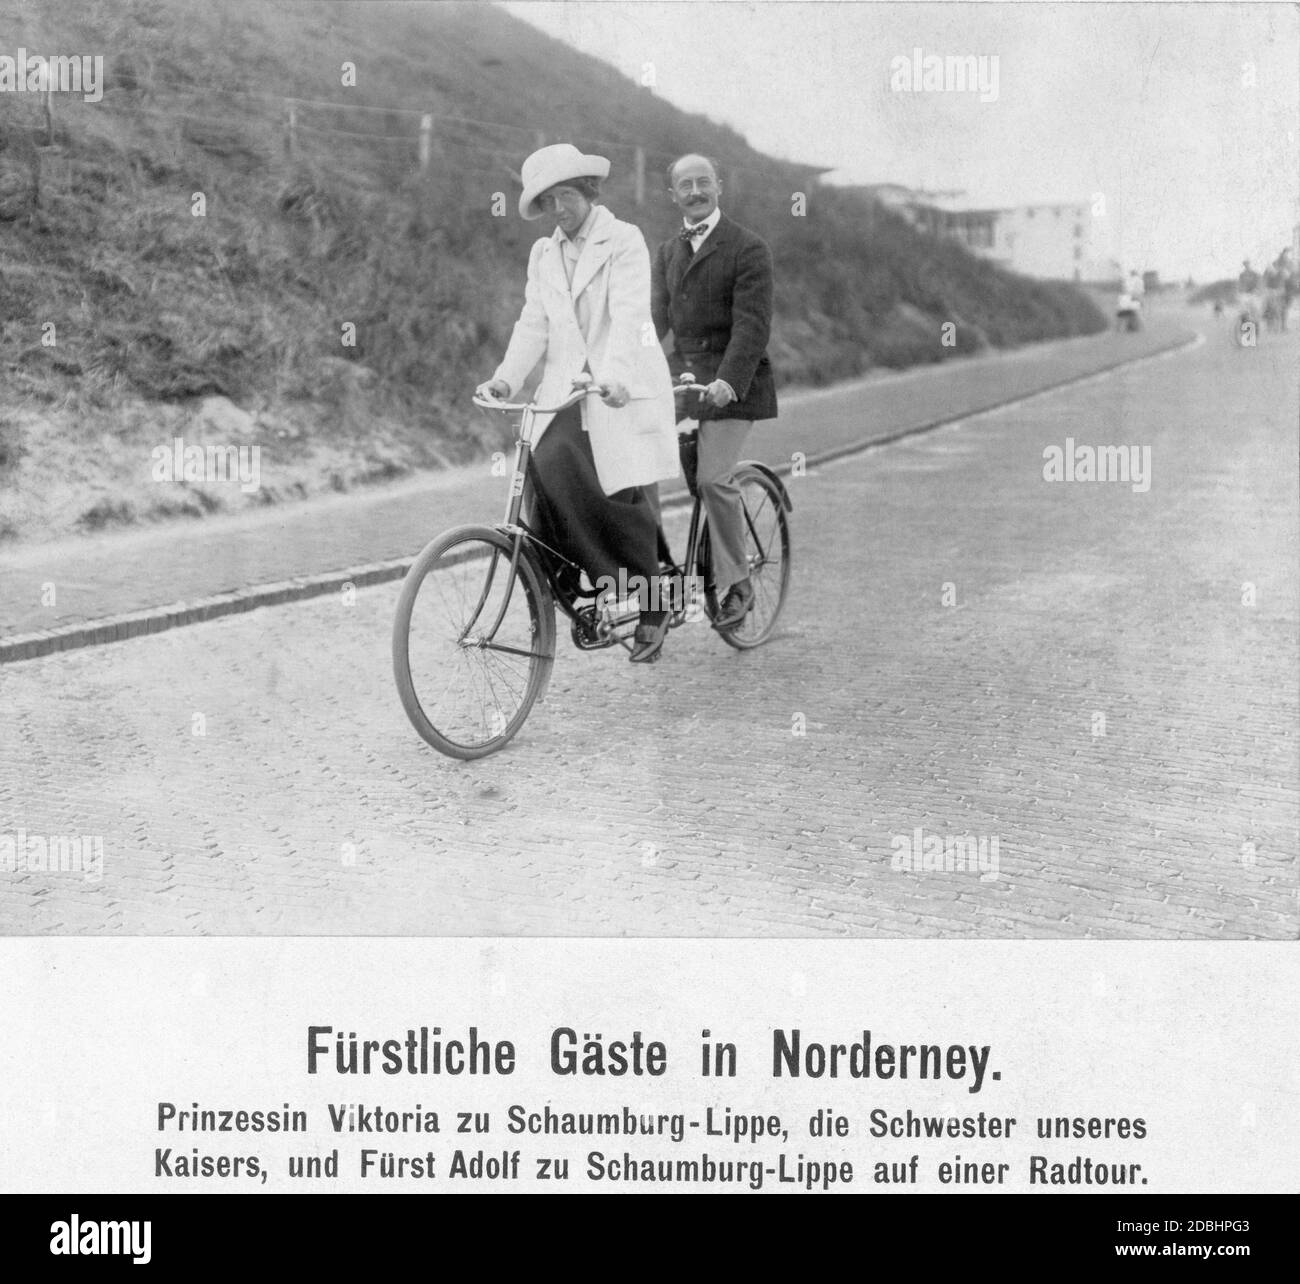 Princess Viktoria of Schaumburg-Lippe (born of Prussia) and her husband Prince Adolf of Schaumburg-Lippe took a tandem bicycle tour on the island of Norderney in 1913. Stock Photo